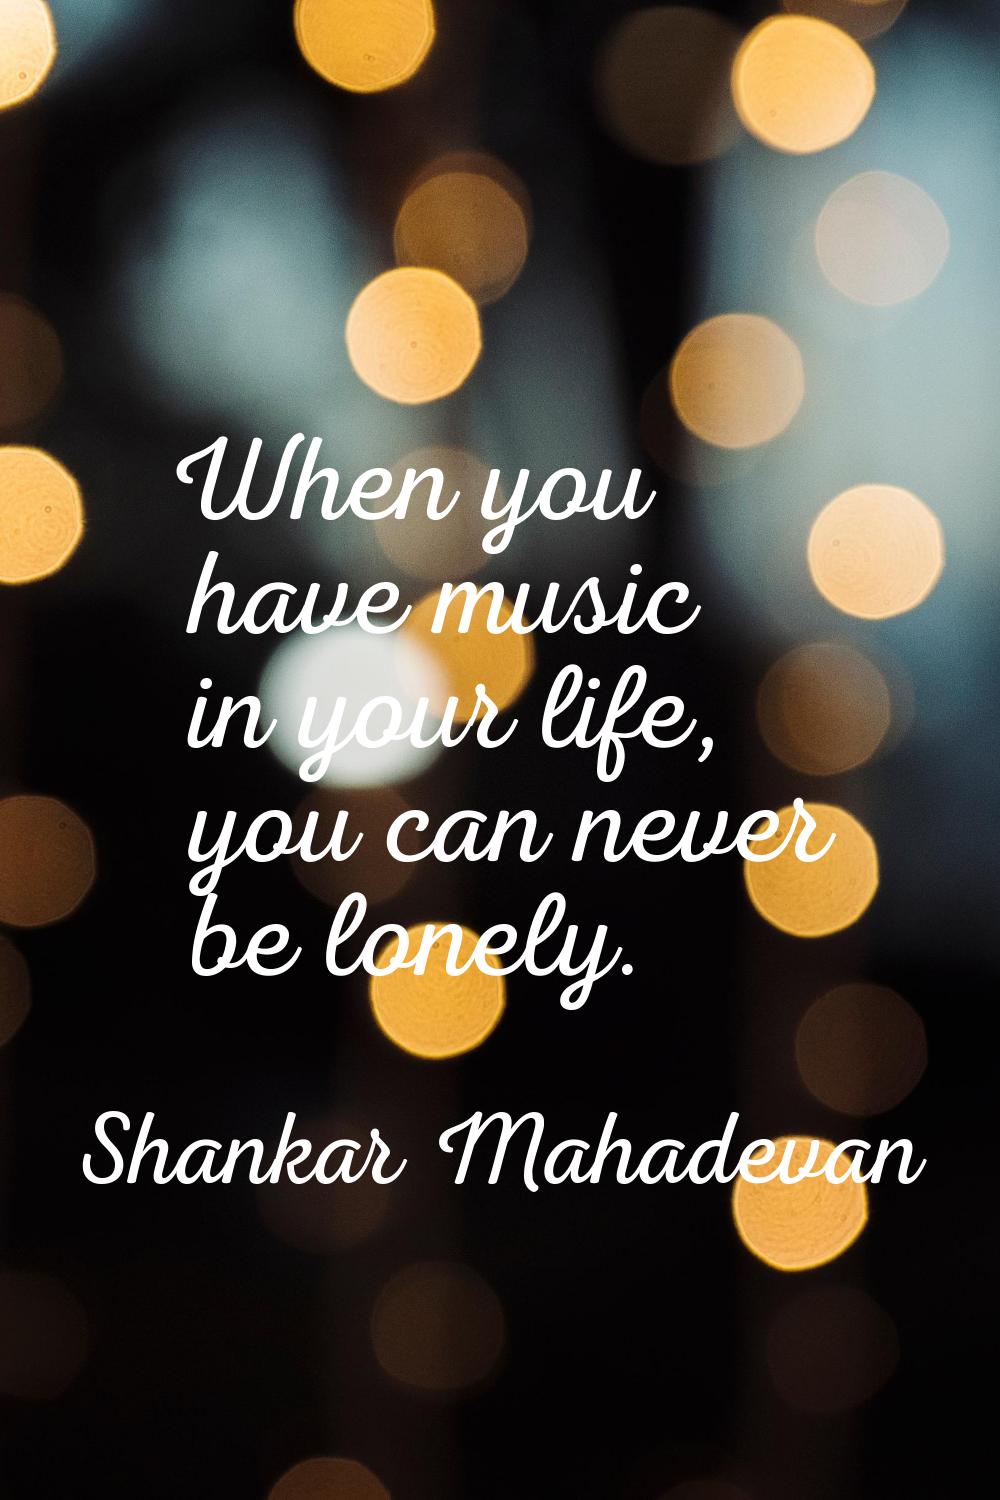 When you have music in your life, you can never be lonely.